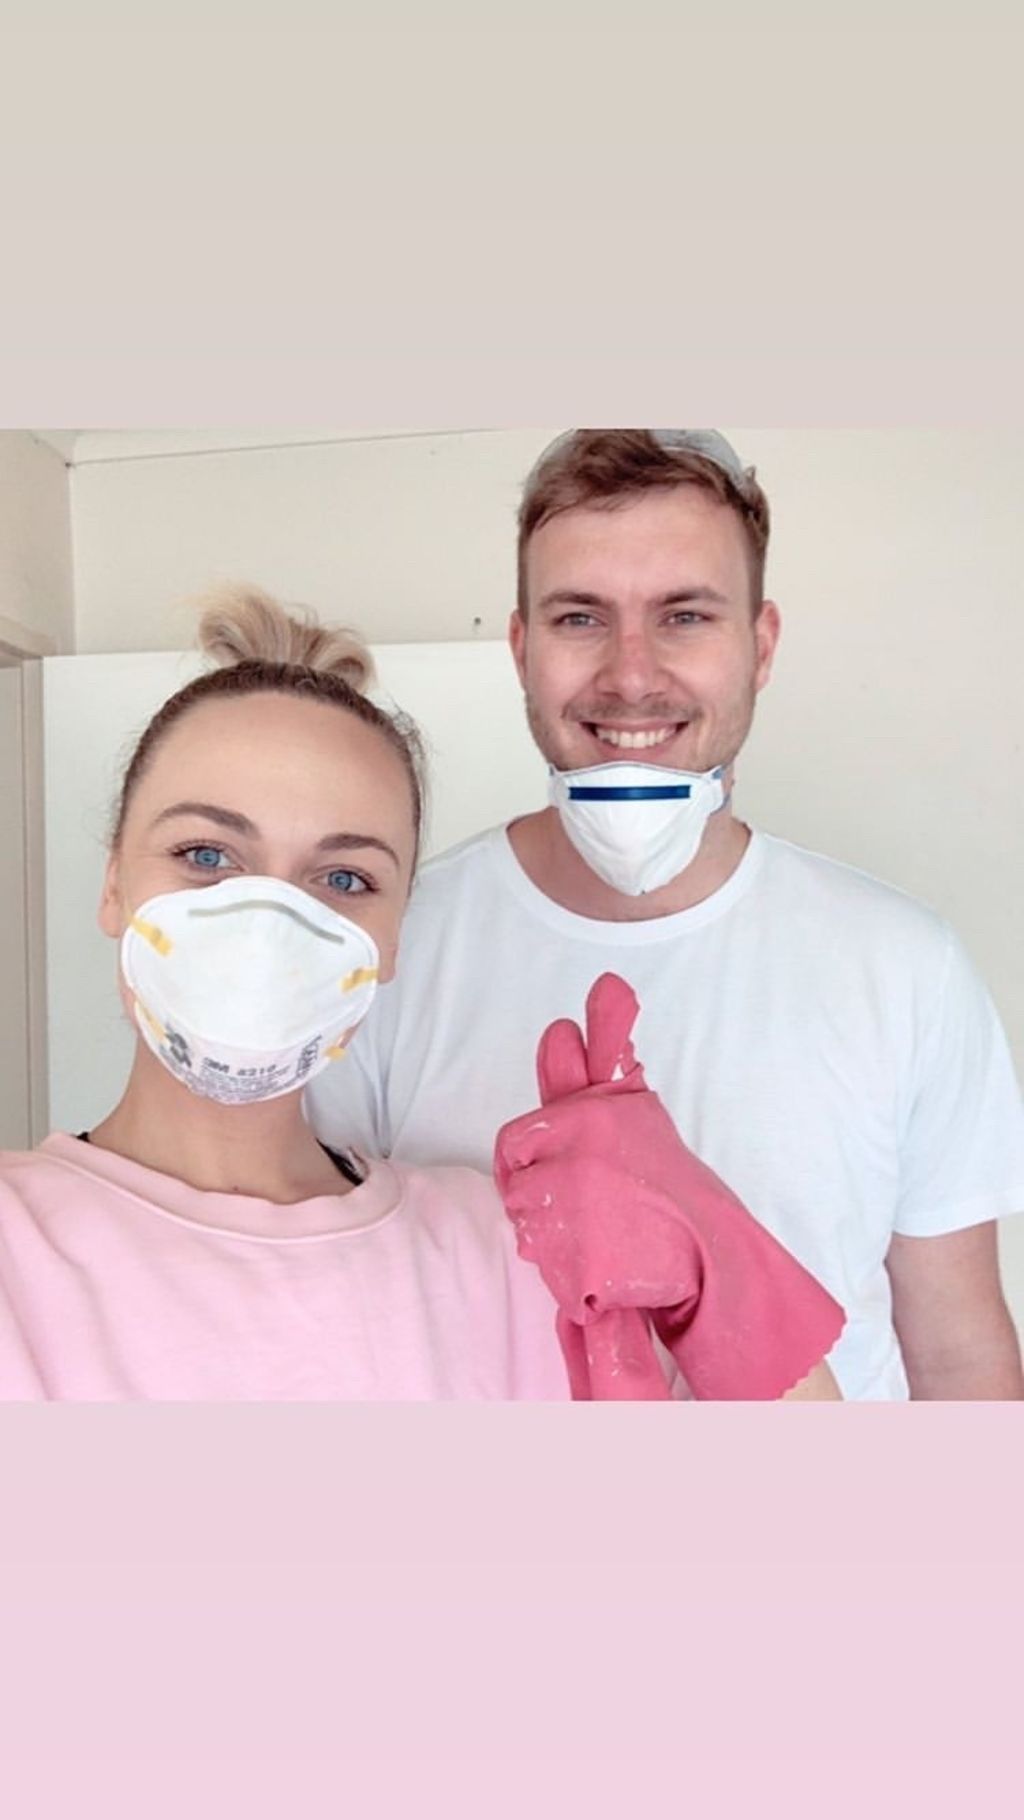 Maddi O'Donahoo and her partner are renovating their first home together in time for Christmas. Photo: Supplied